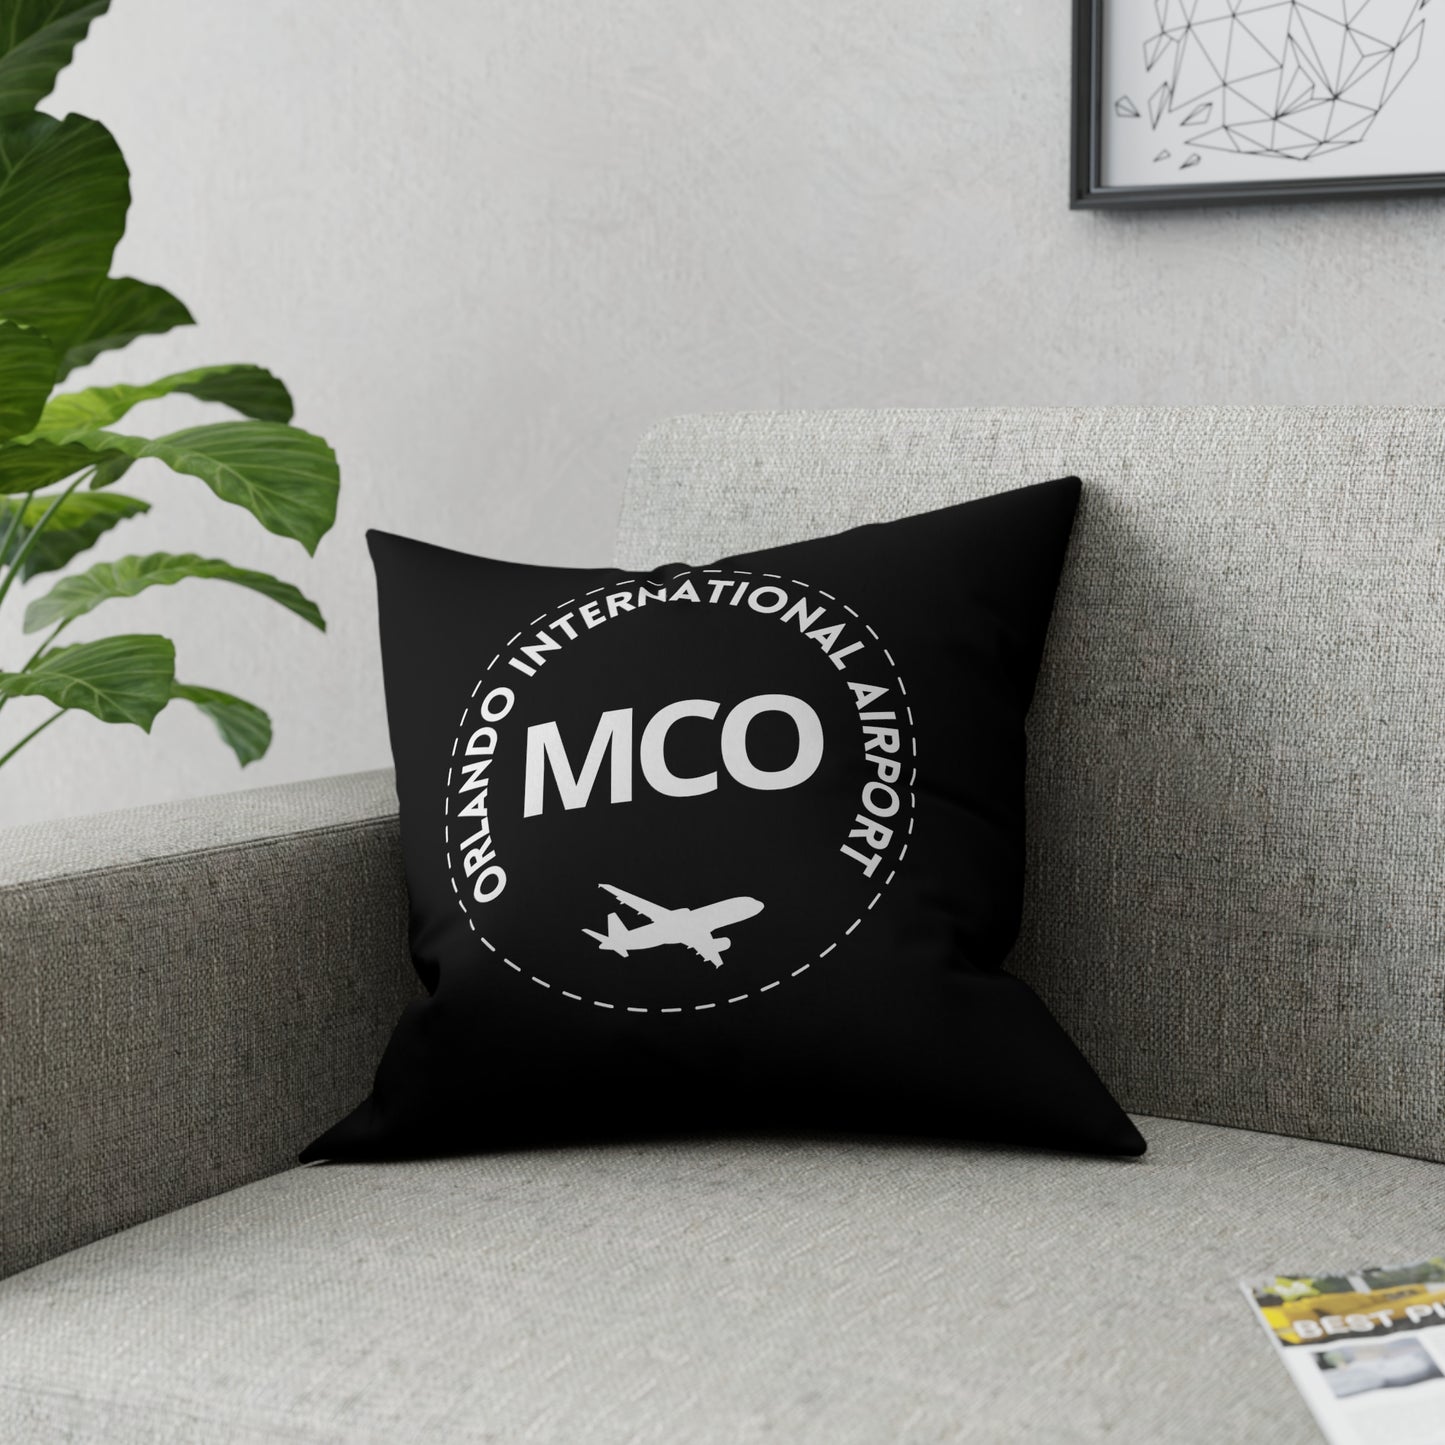 MCO Airport Code Pillow Black | Aviation Gift | Pilot Gift | Airline Crew and Aviation Worker Gift | Aviation Home Décor